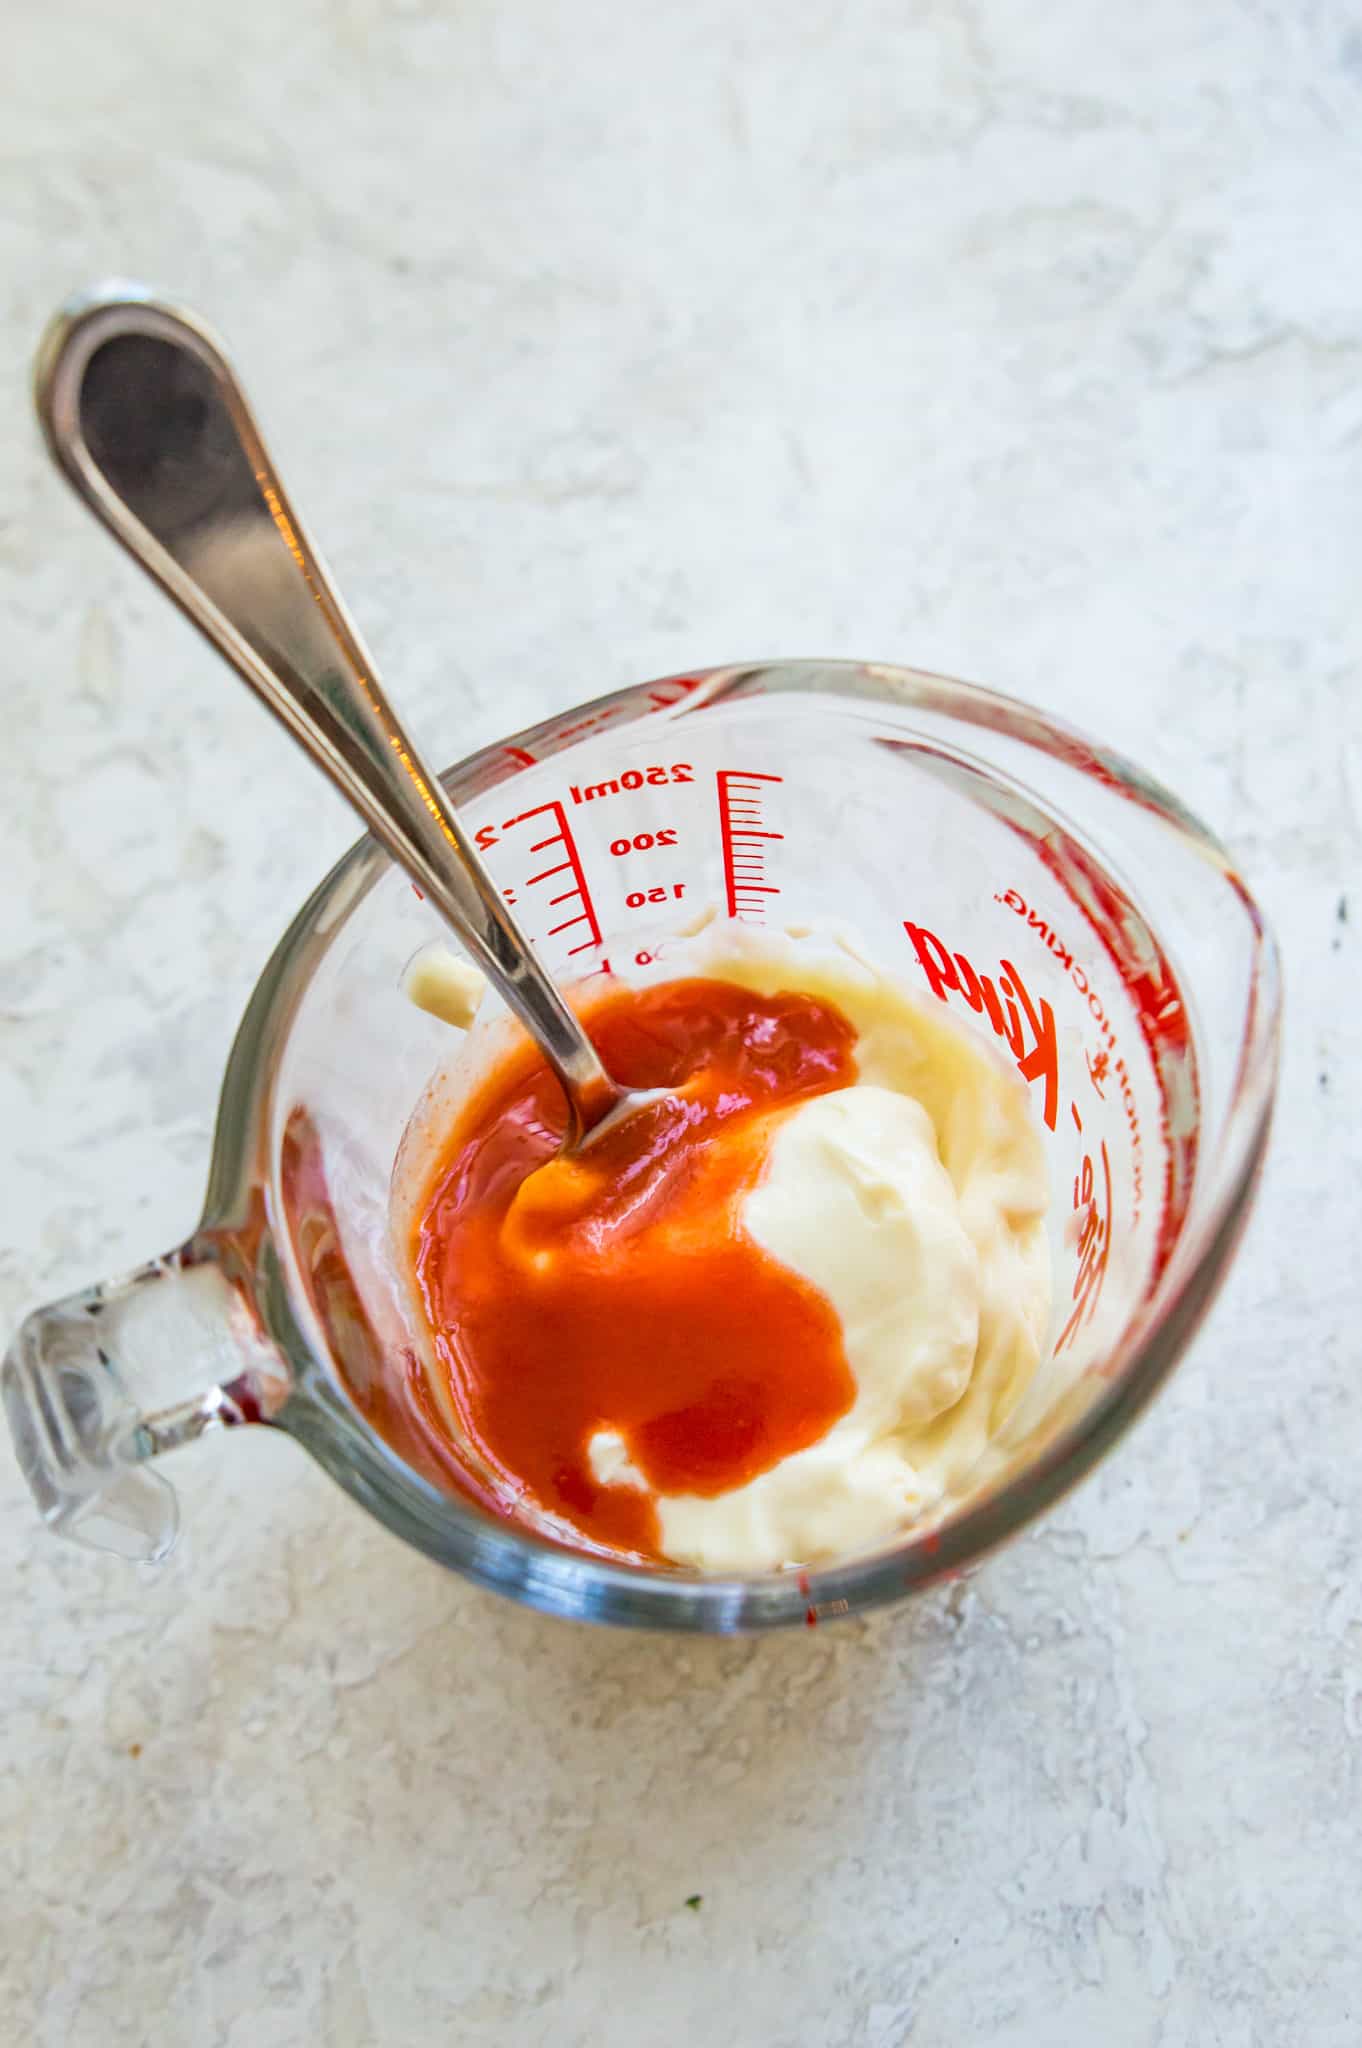 A measuring cup filled with ingredients for making sriracha mayo.